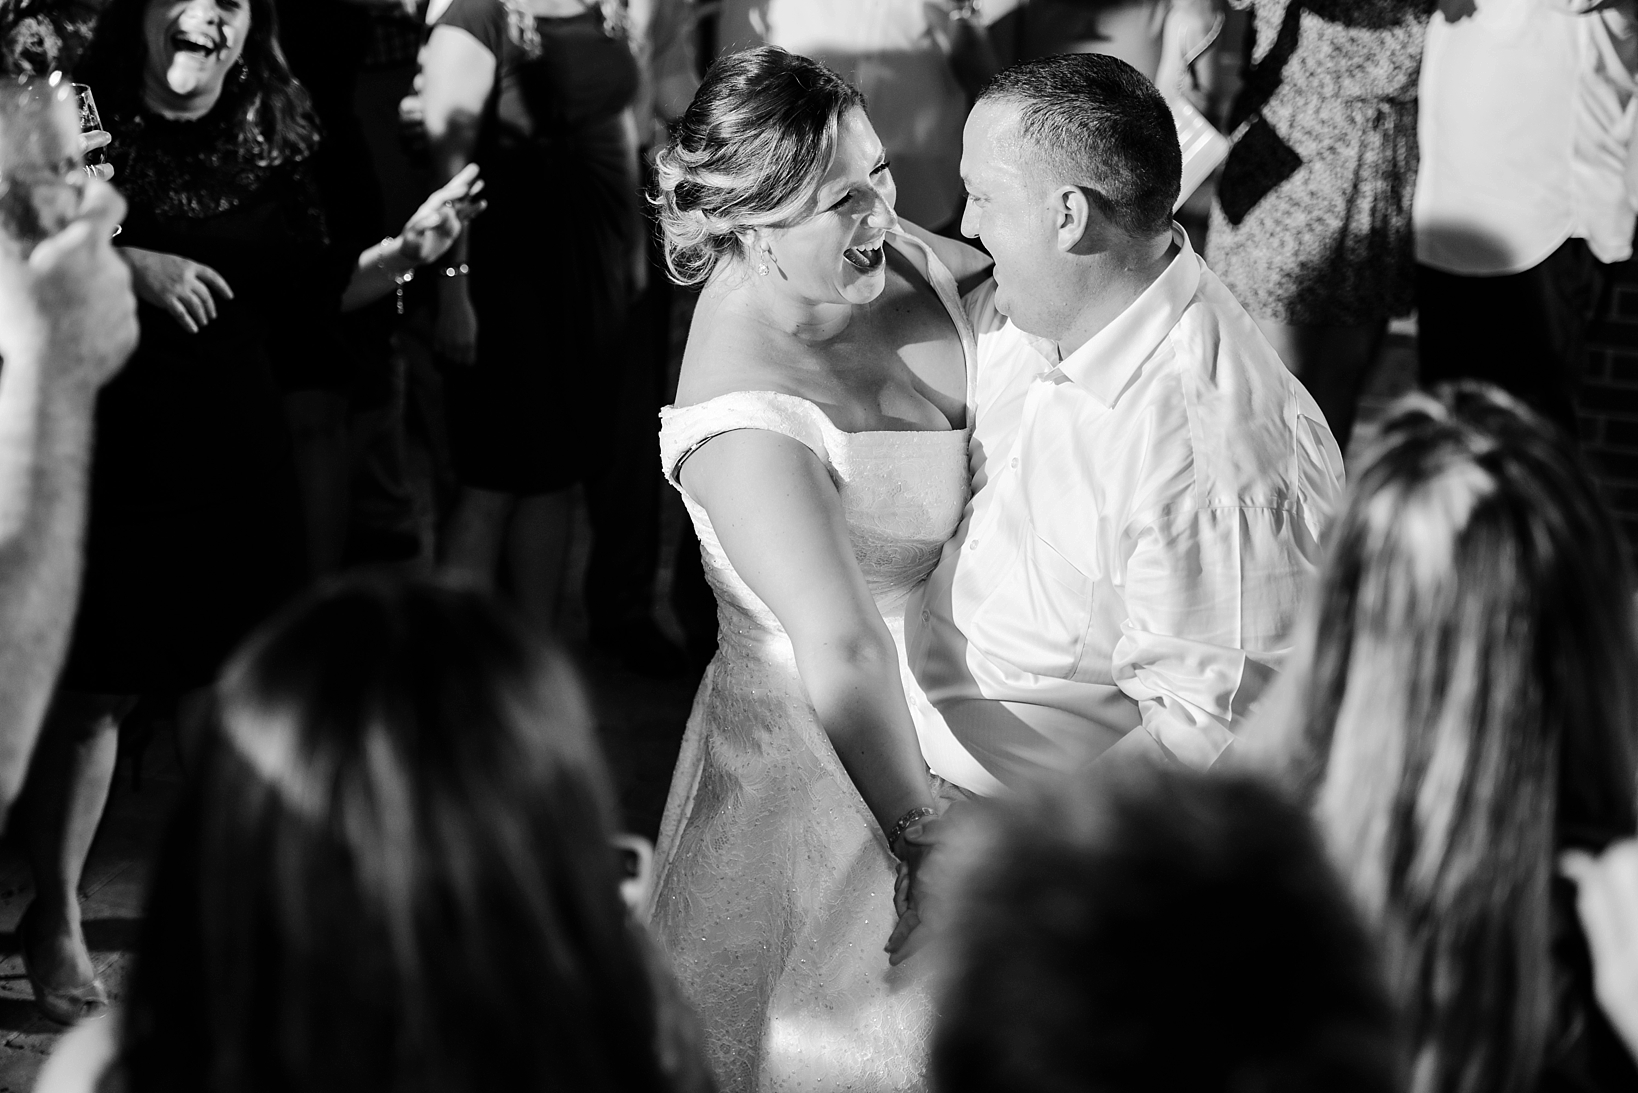 Bride and Groom sharing a joyous moment during their last dance surrounded by all their friends and family